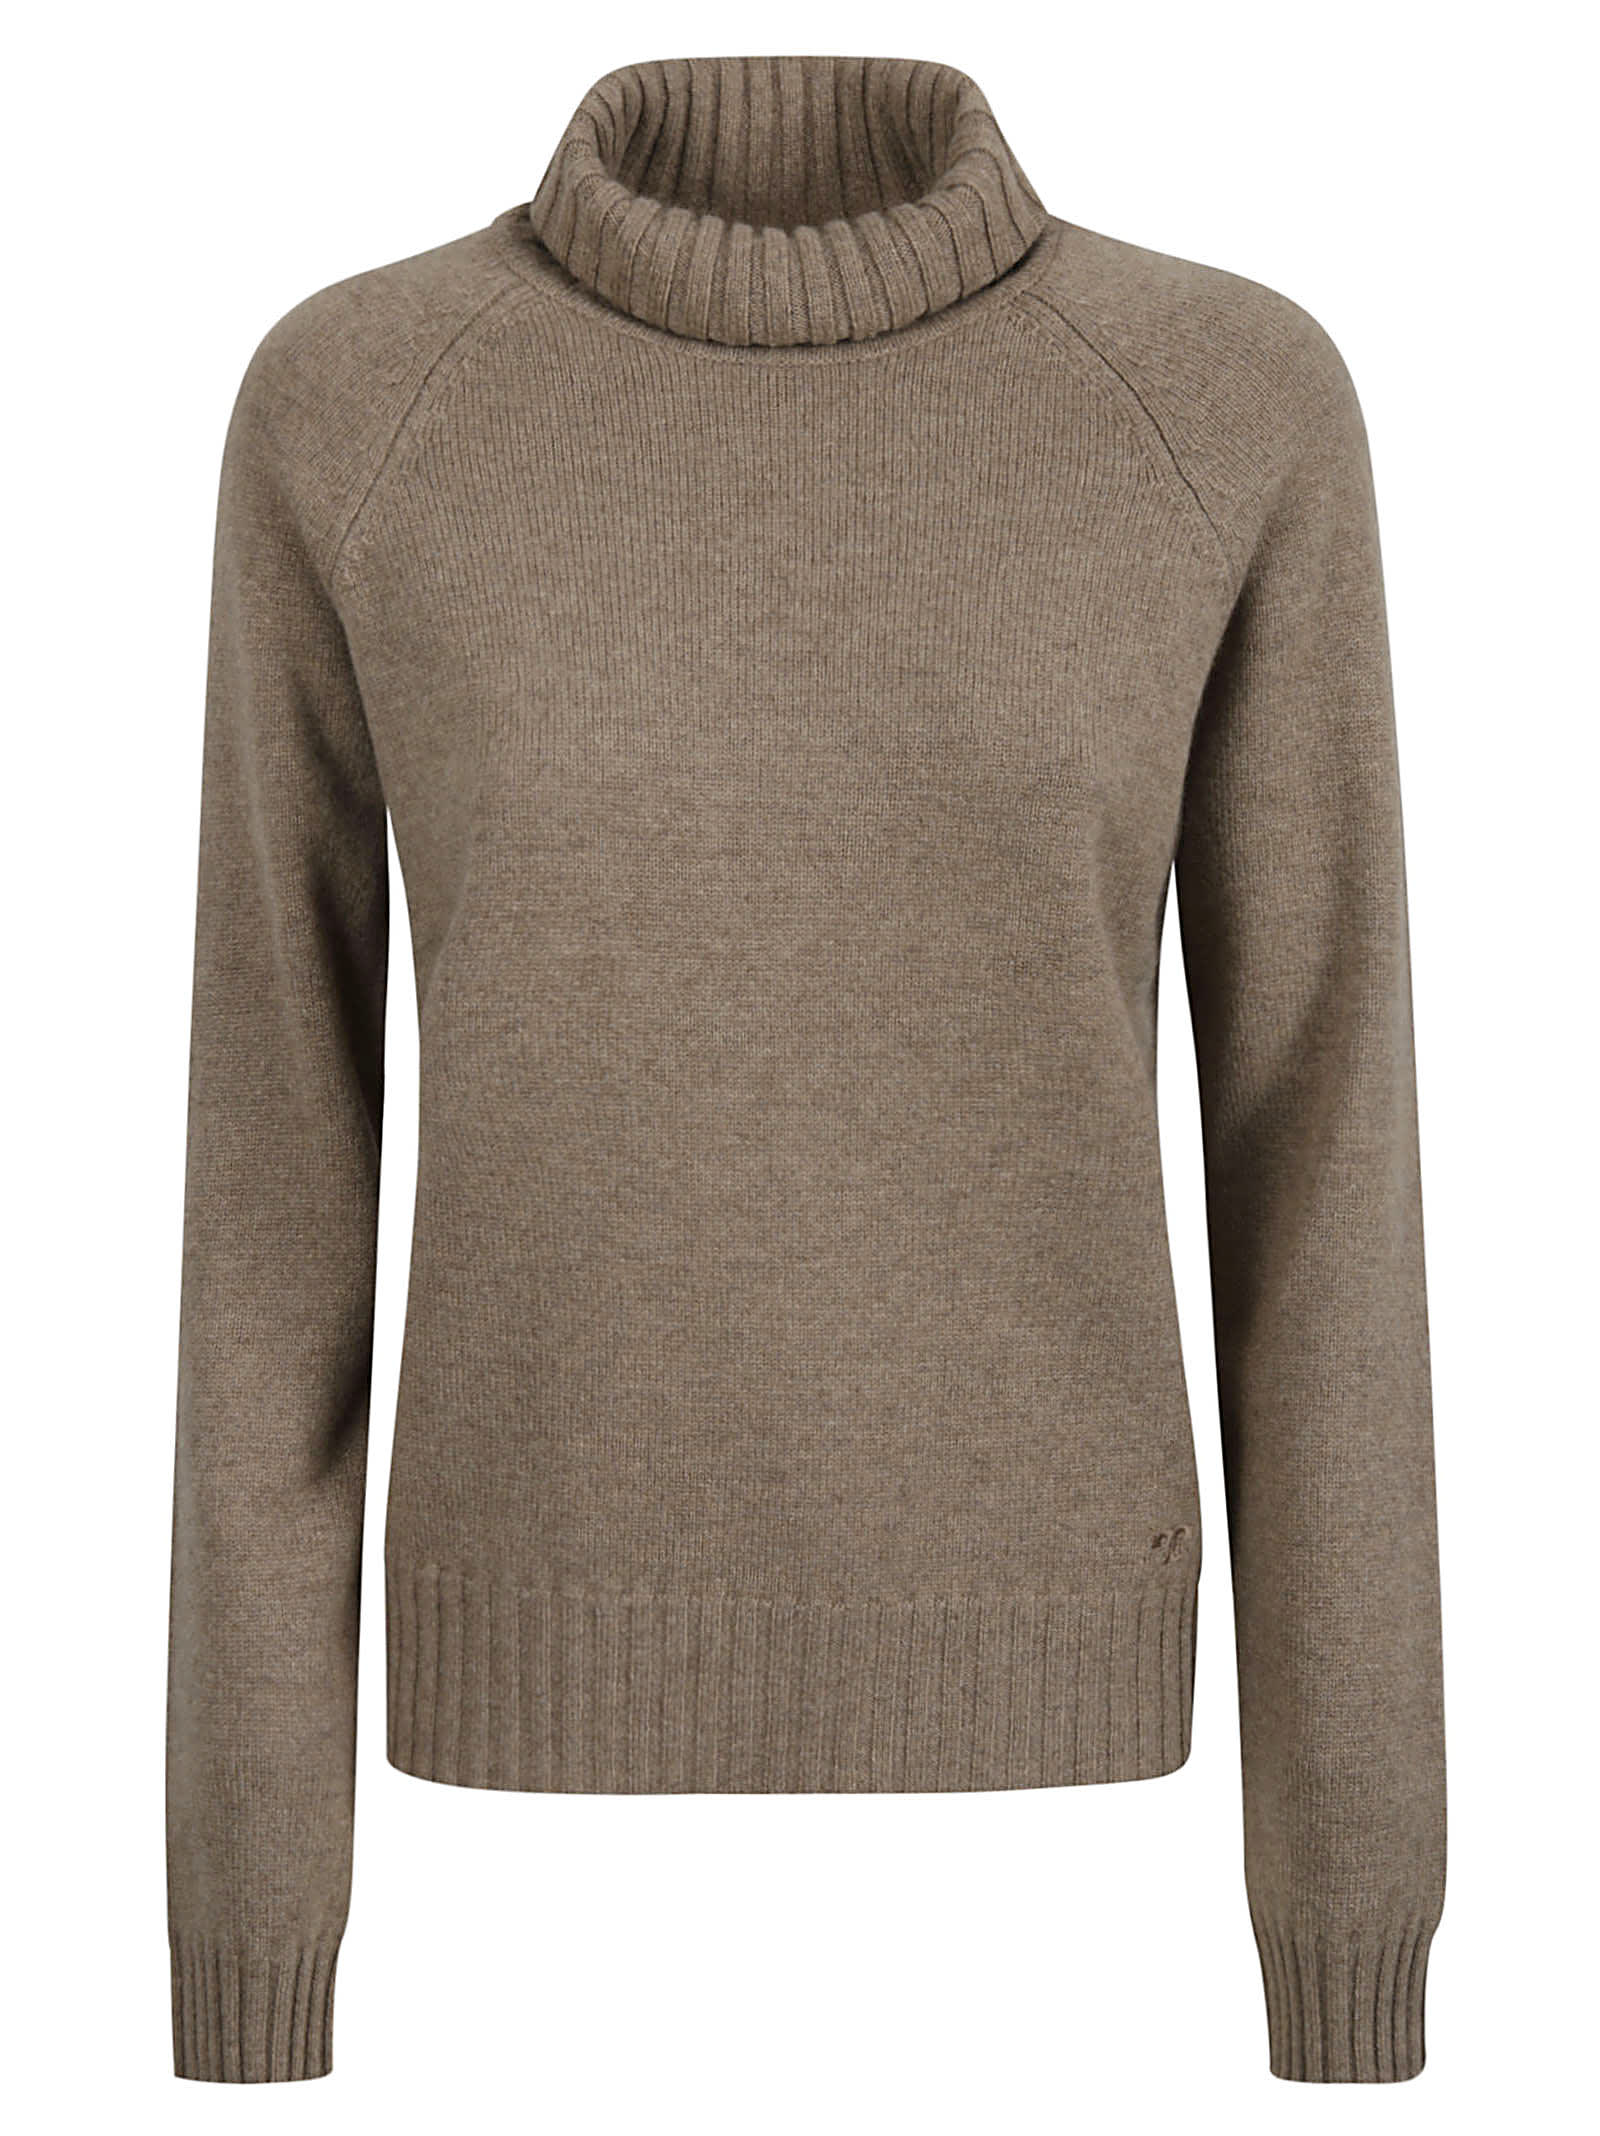 Tory Burch Cashmere Turtleneck Pullover